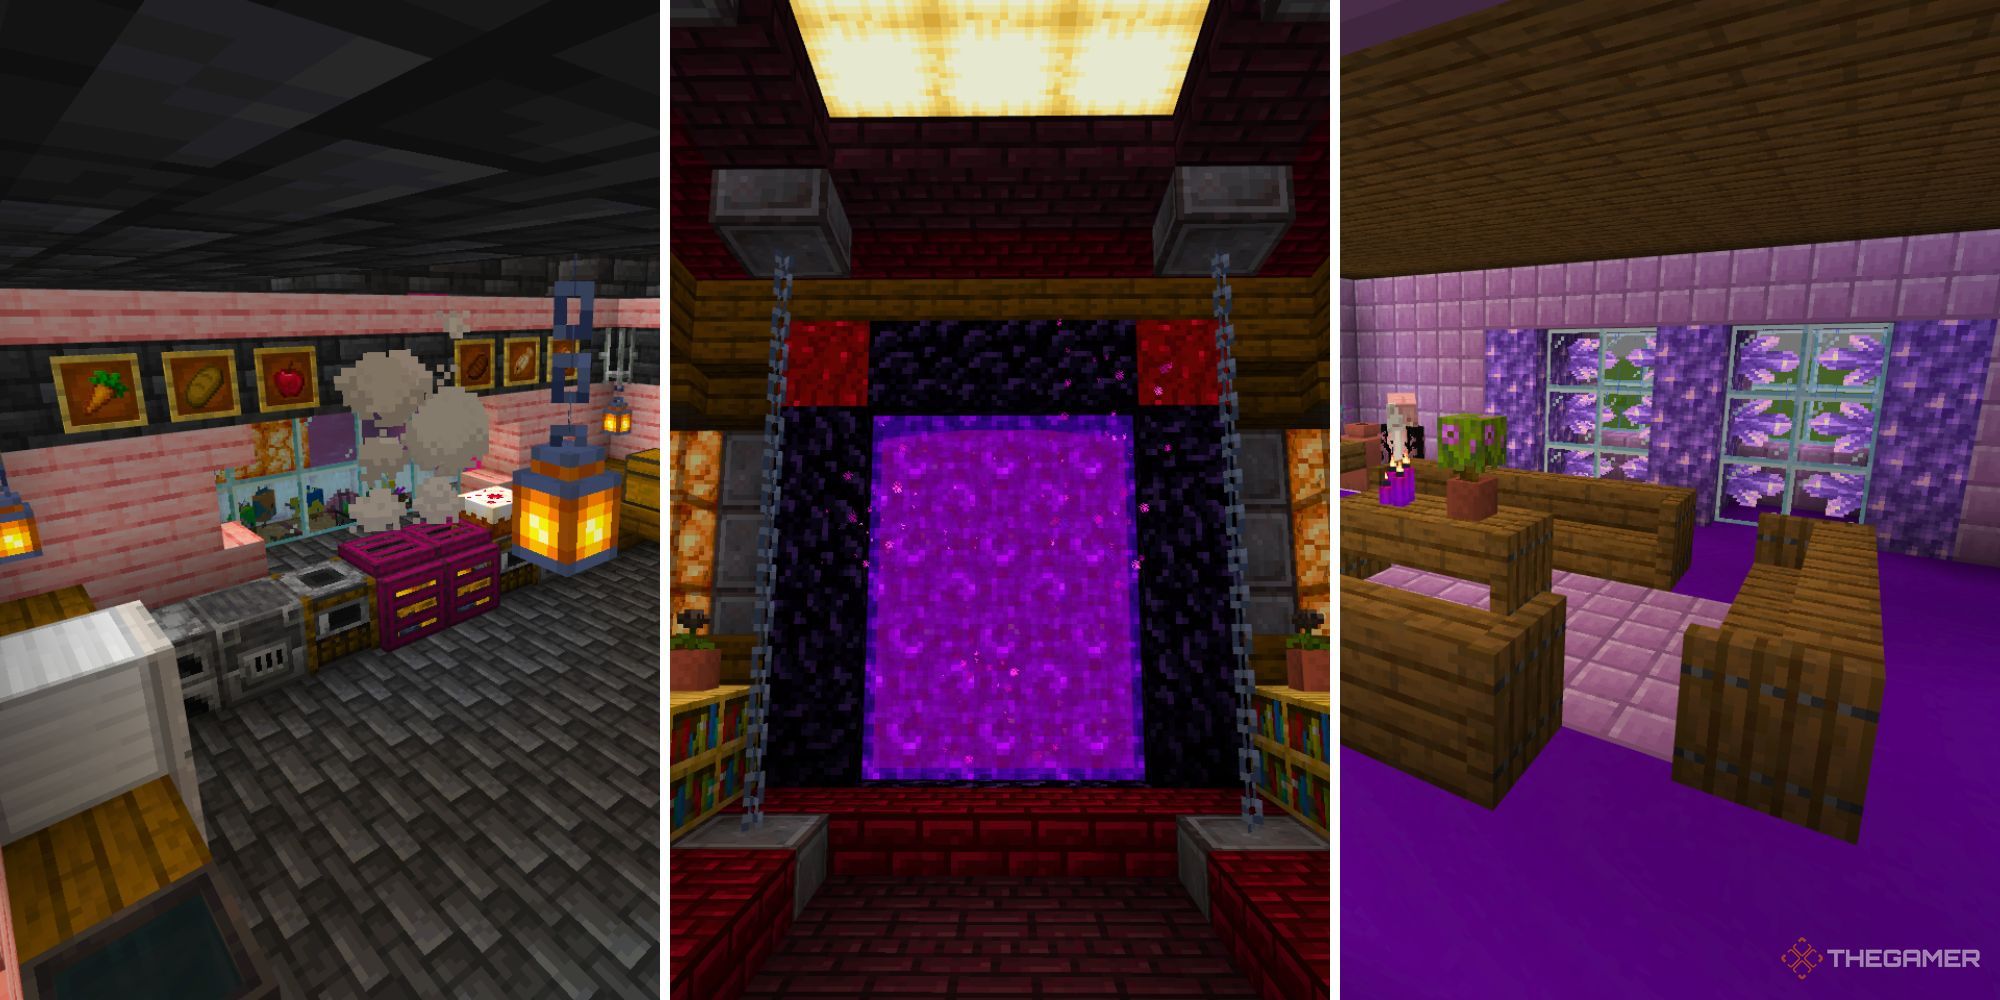 A split image of a pink and black kitchen with lanterns, a red and black nether portal roomo, and a purple amethyst lounge.